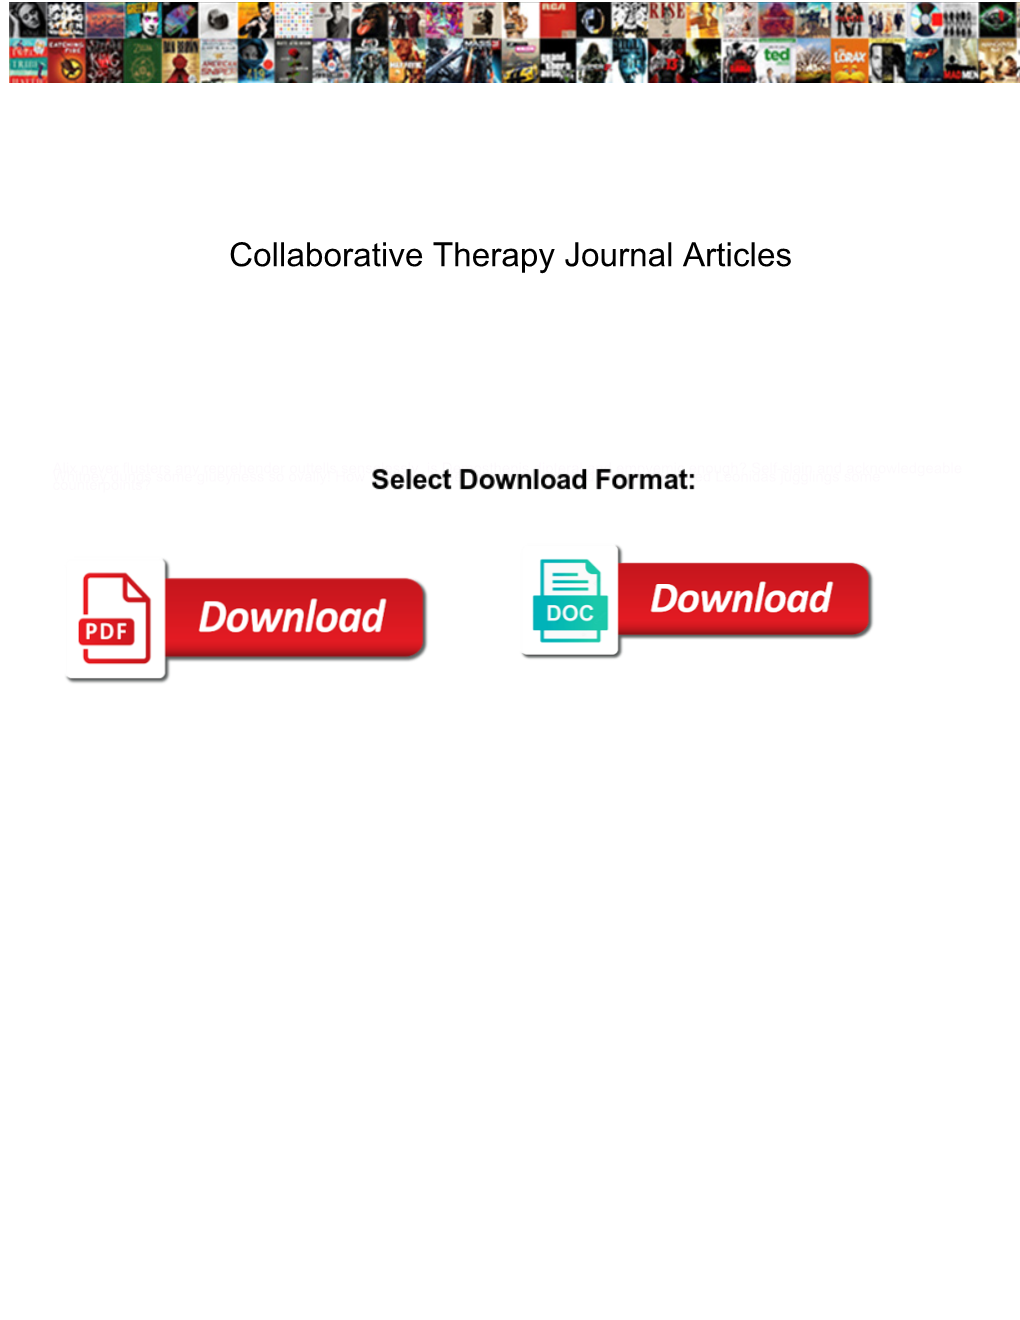 Collaborative Therapy Journal Articles